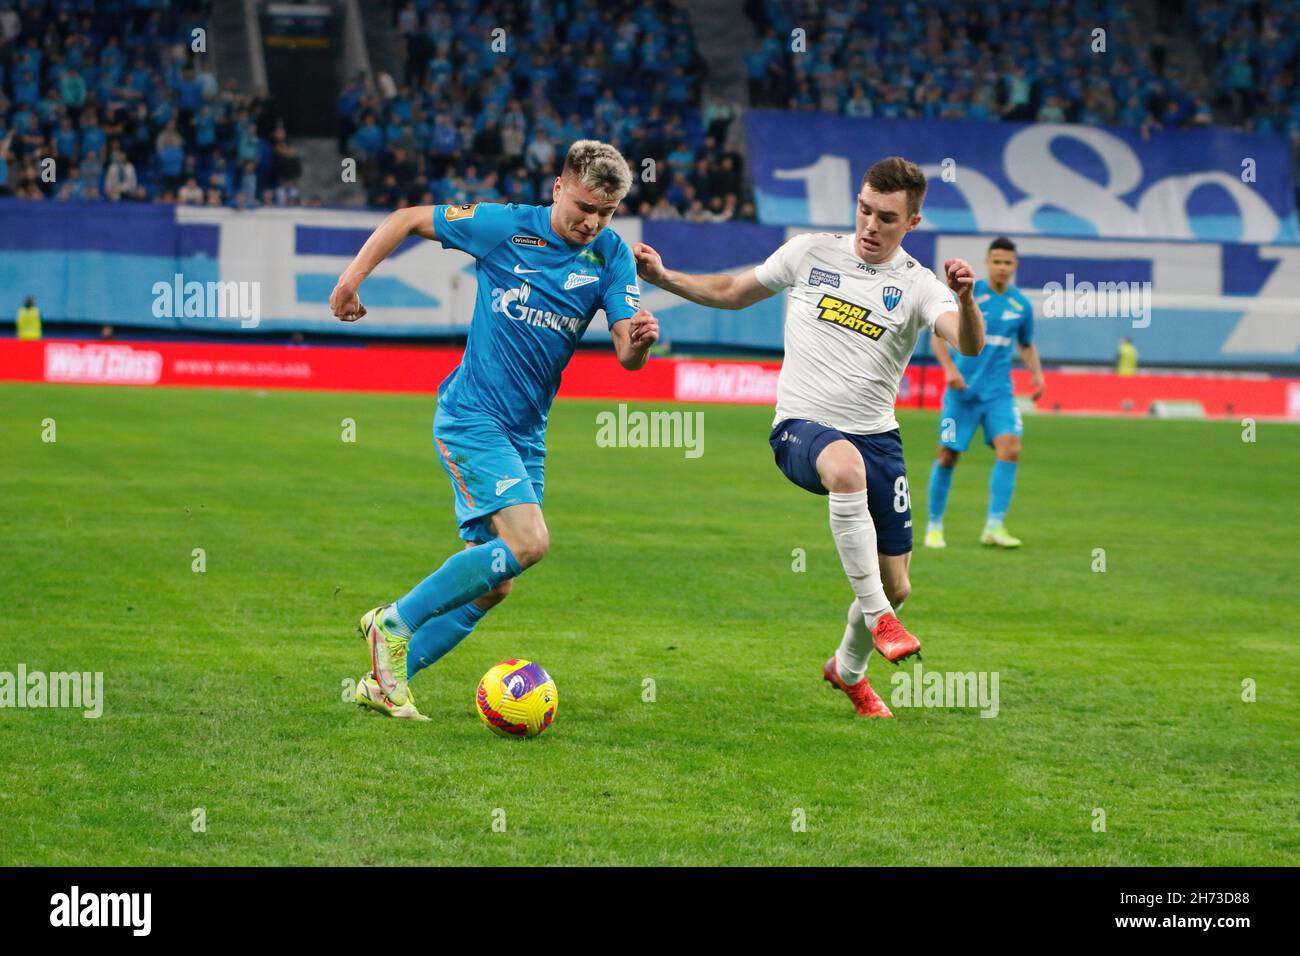 Saint Petersburg, Russia. 19th Nov, 2021. Andrey Mostovoy (L) of Zenit and Ilya Berkovsky (R) of Nizhny Novgorod are seen in action during the Russian Premier League football match between Zenit Saint Petersburg and Nizhny Novgorod at Gazprom Arena.Final score; Zenit 5:1 Nizhny Novgorod. Credit: SOPA Images Limited/Alamy Live News Stock Photo